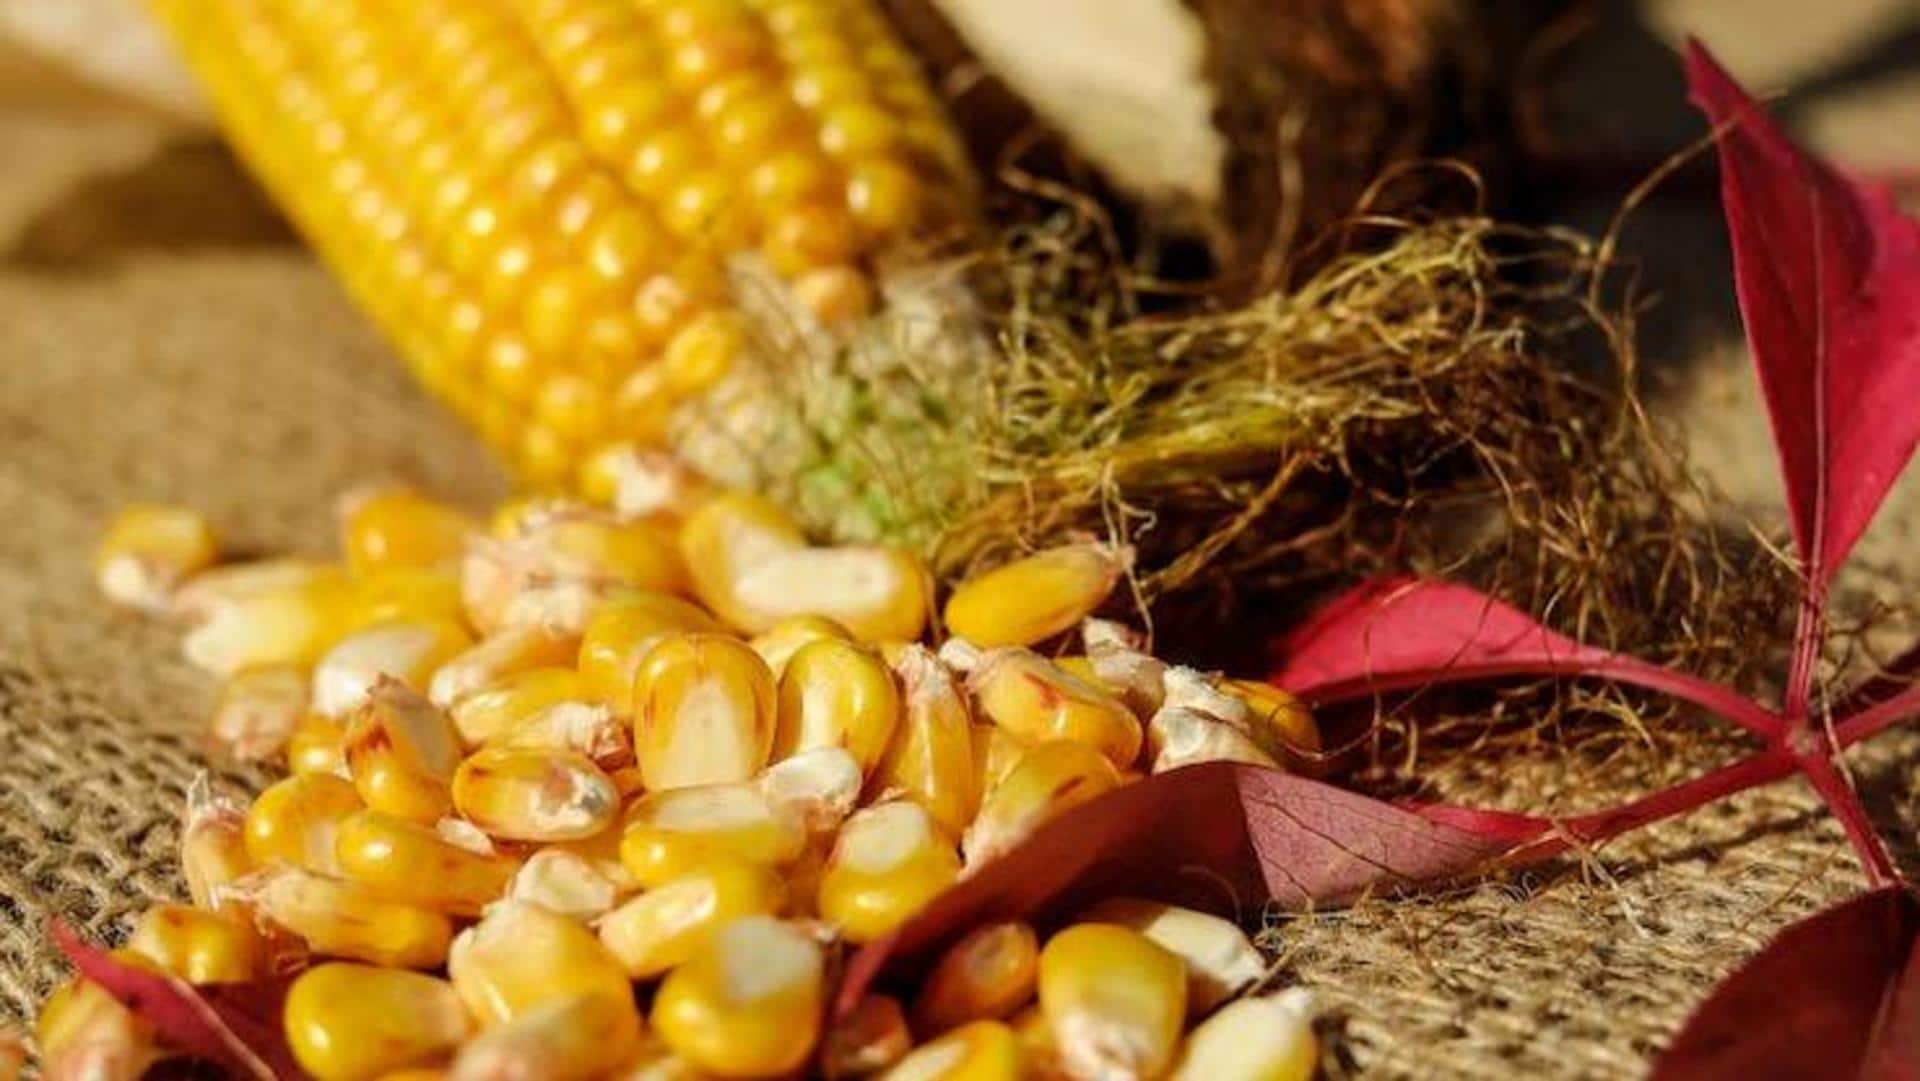 Get corny with these corn dishes from around the world